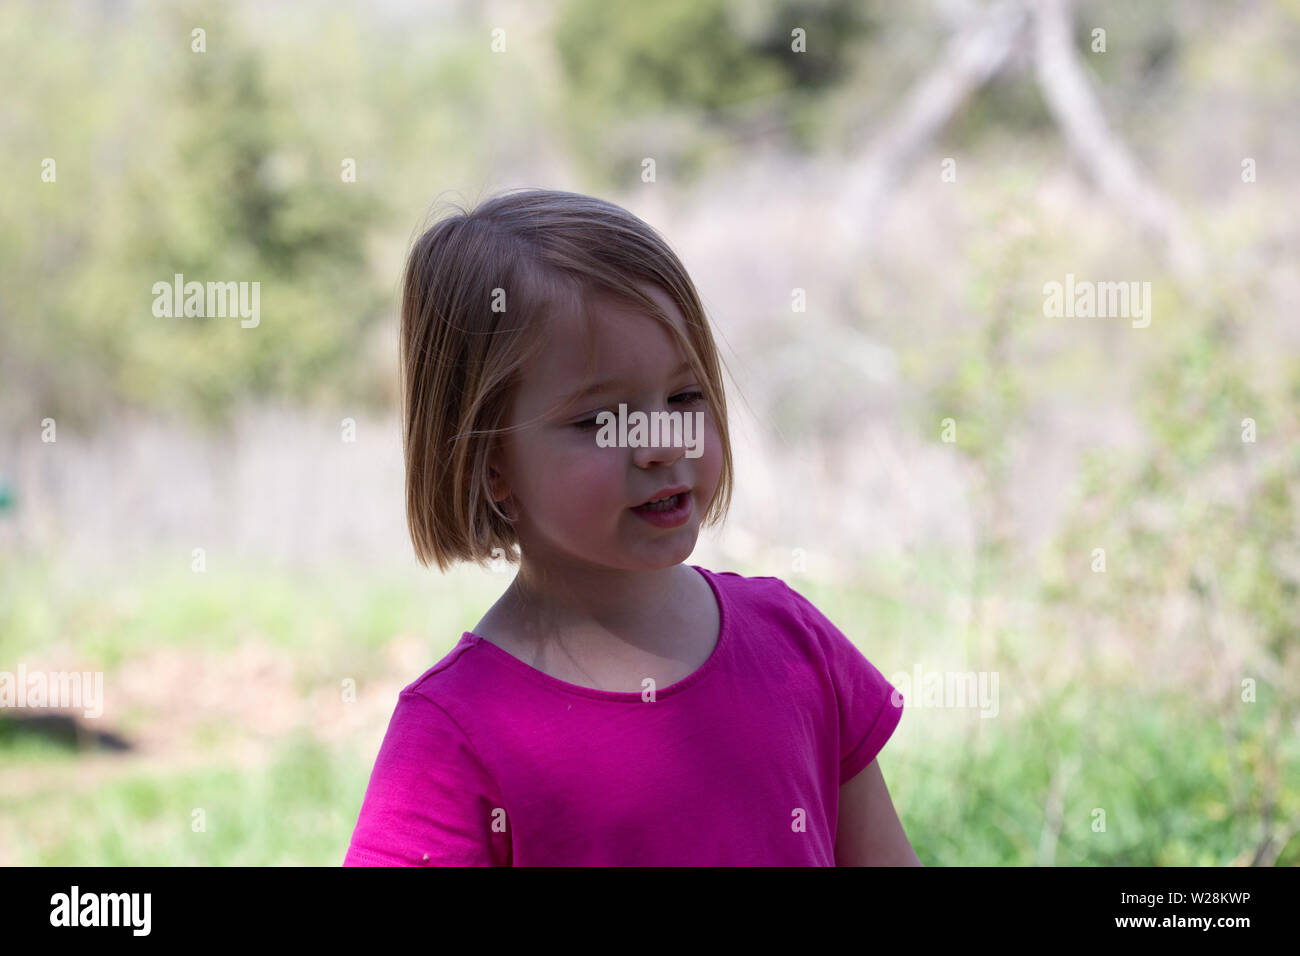 Close up of young girl in pink dress playing in the outdoors Stock Photo